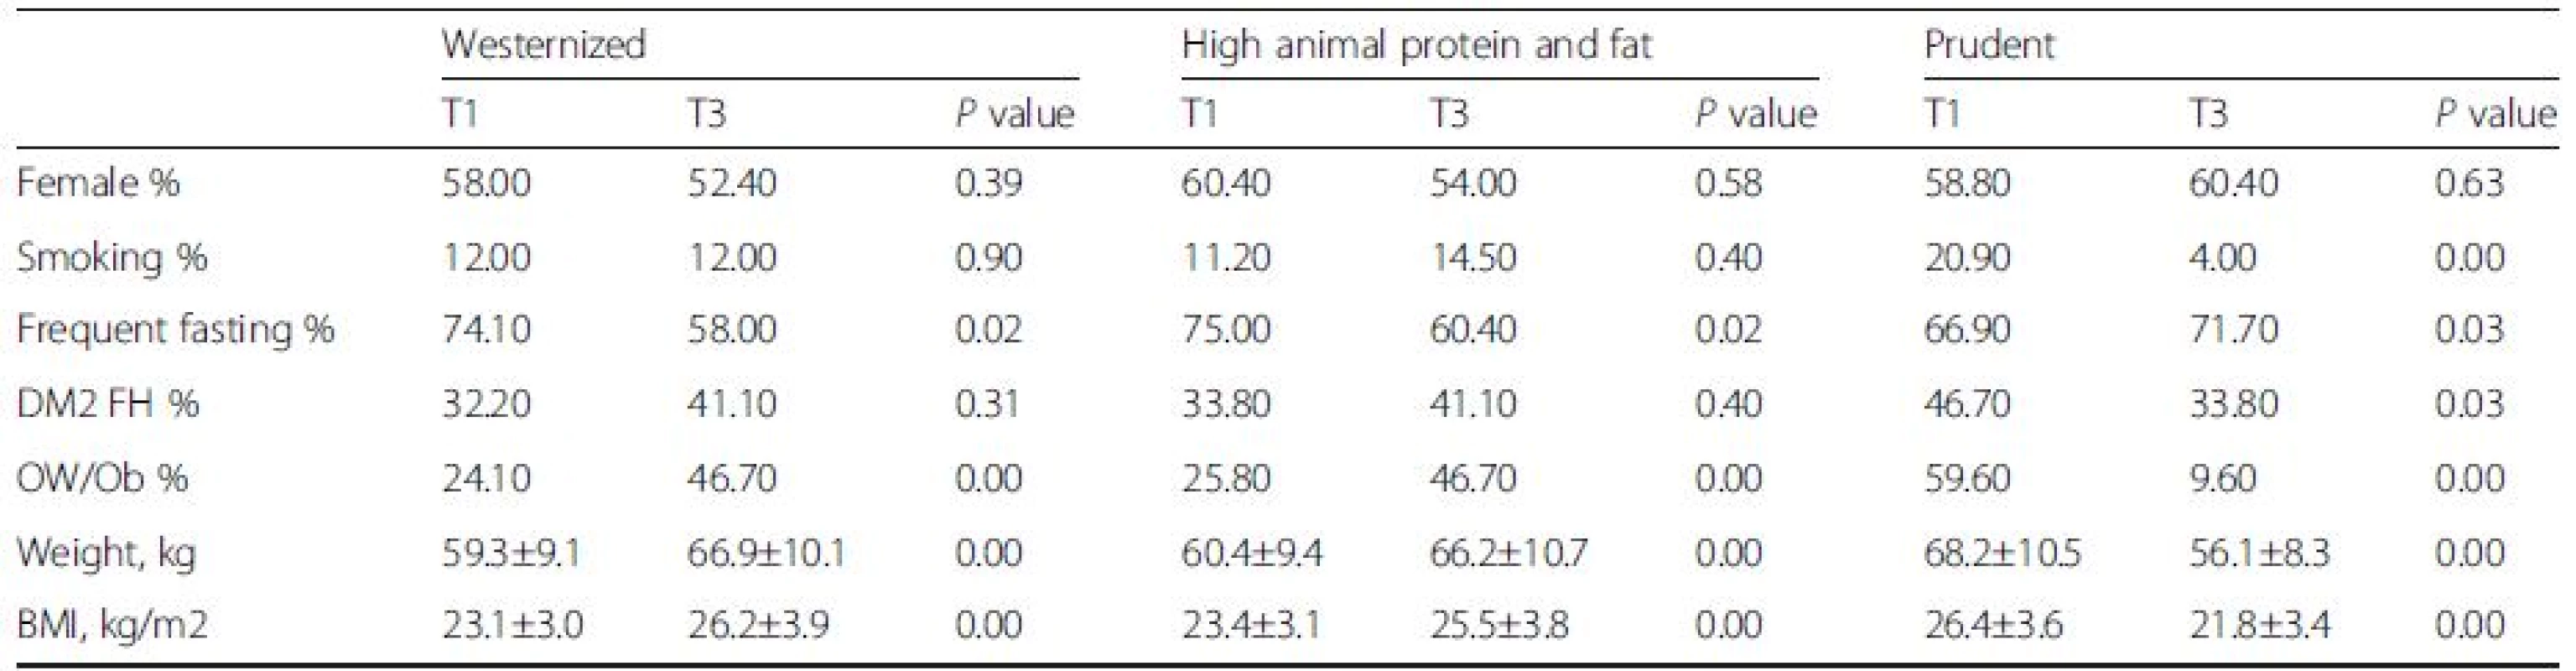 Characteristics of sample across tertiles of dietary patterns